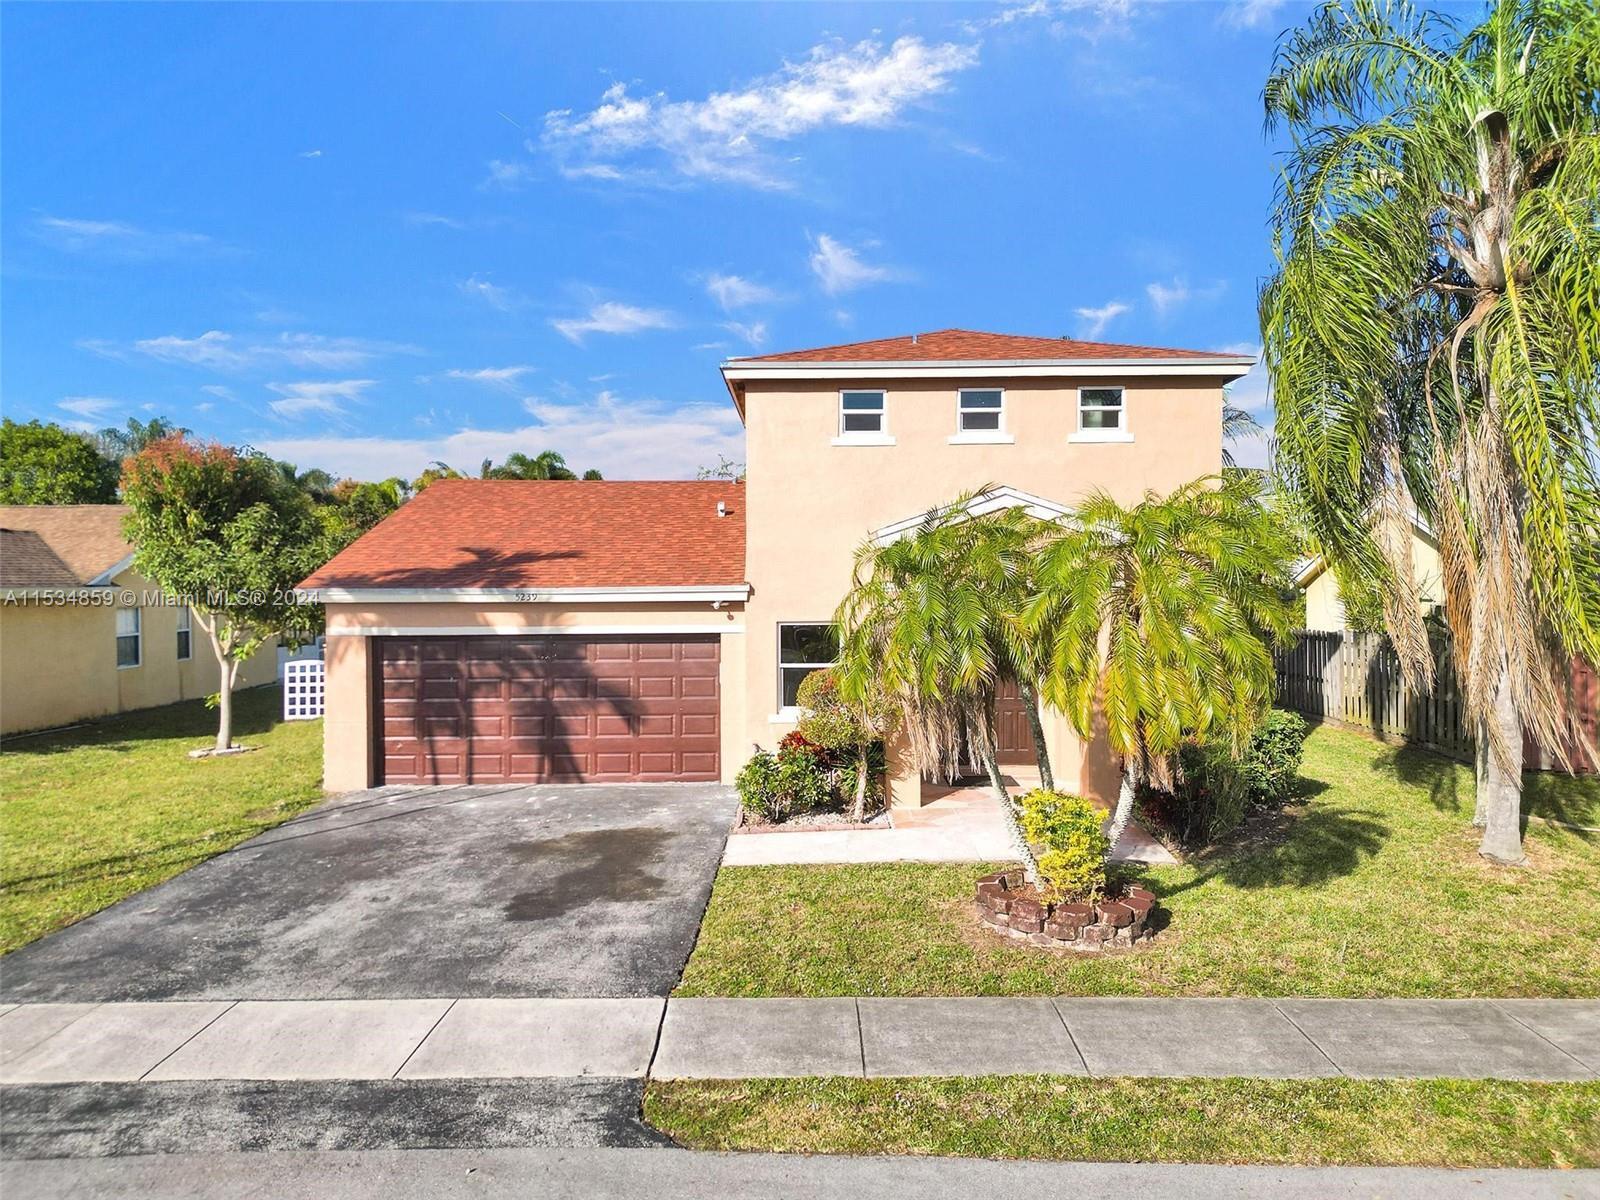 Photo of 5239 NW 96th Ave in Sunrise, FL